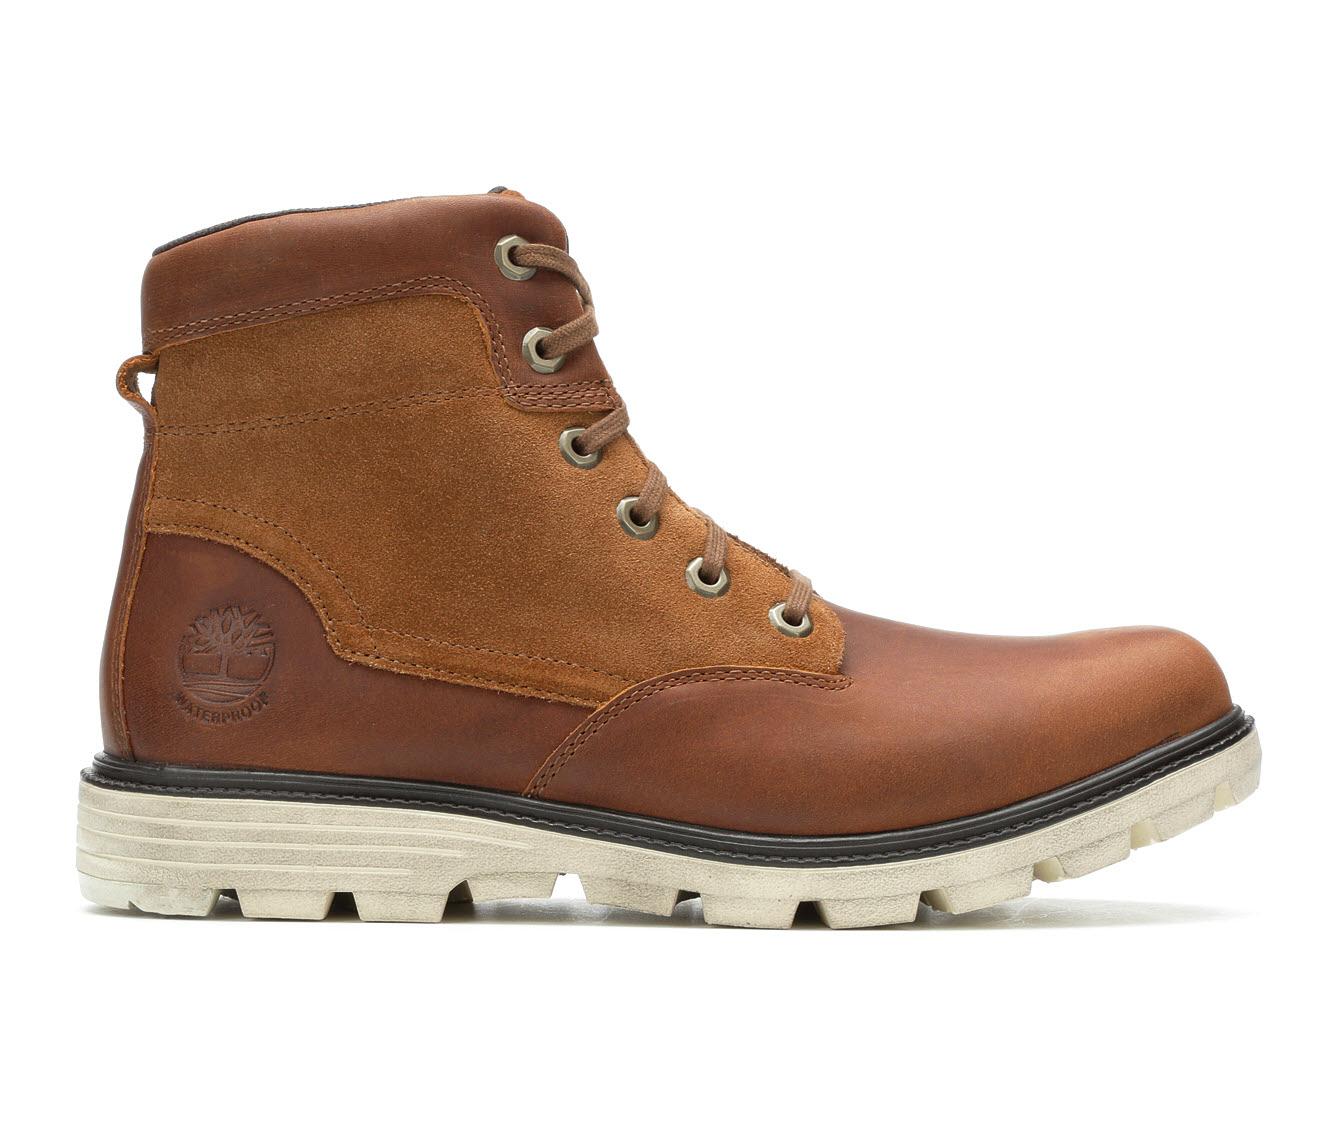 Timberland Walden Park Boot in Brown 